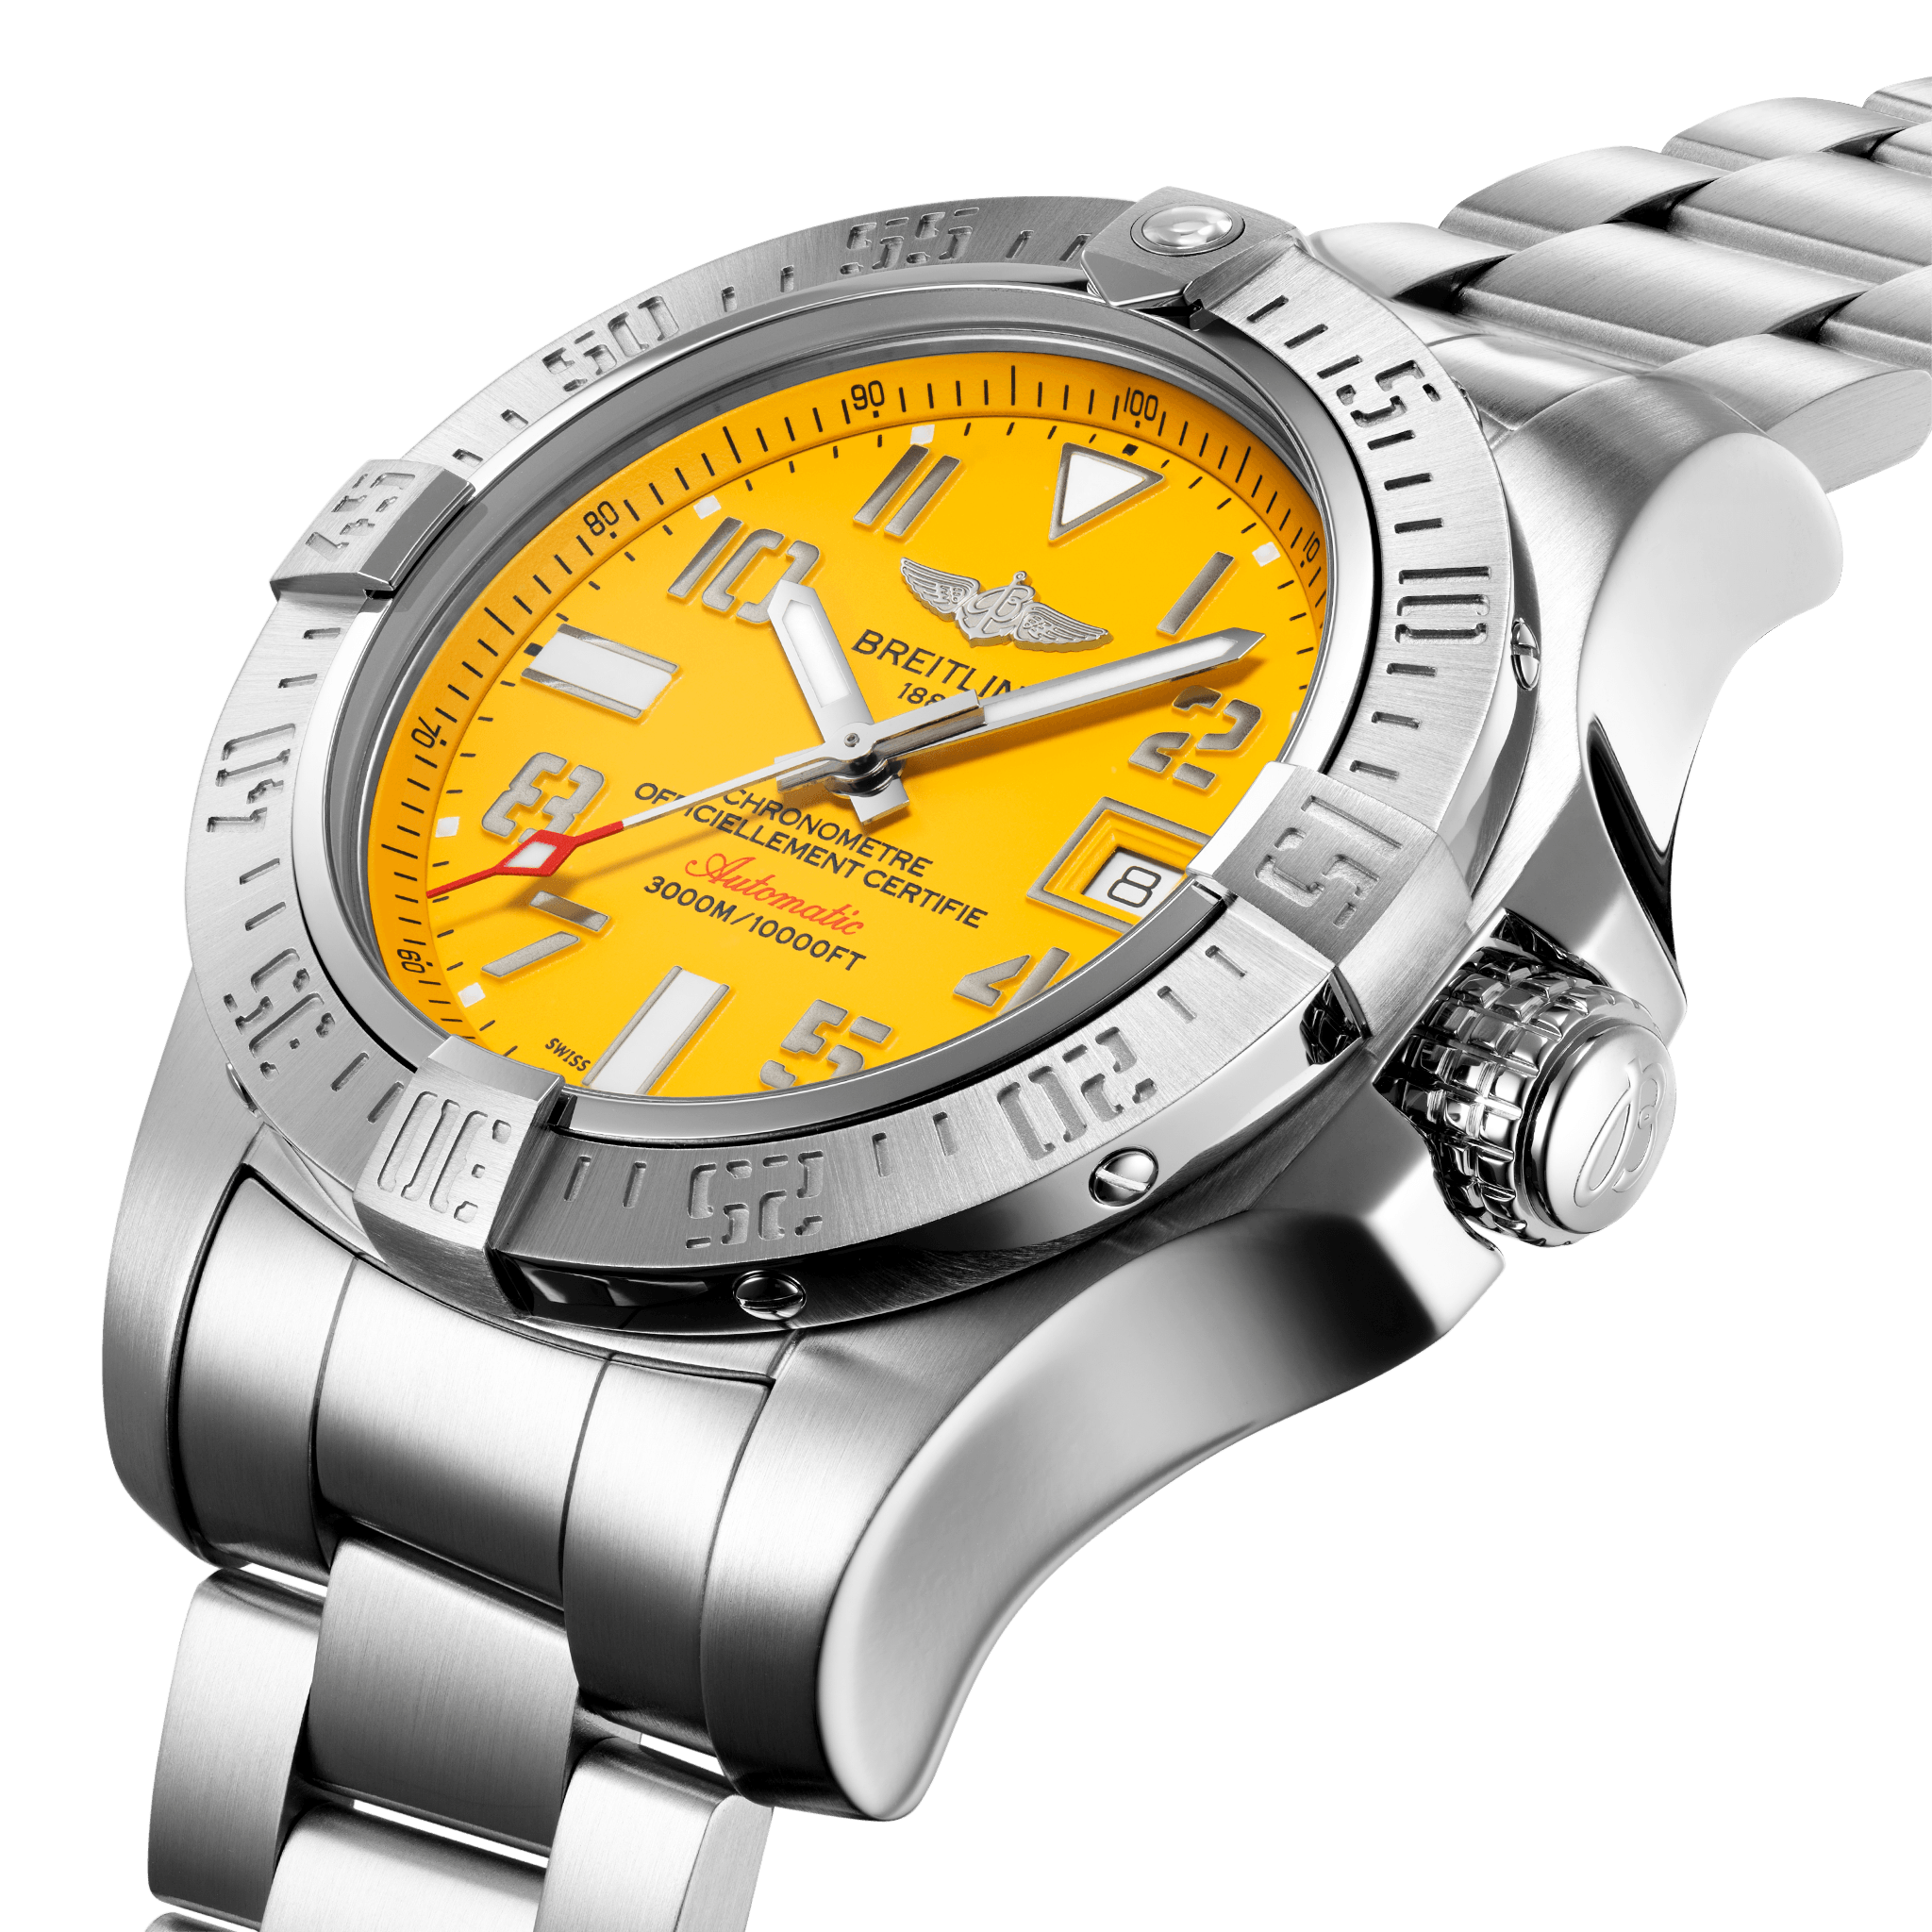 breitling Super Ocean Heritage Chronograph 44 from 0162121g1s1s1